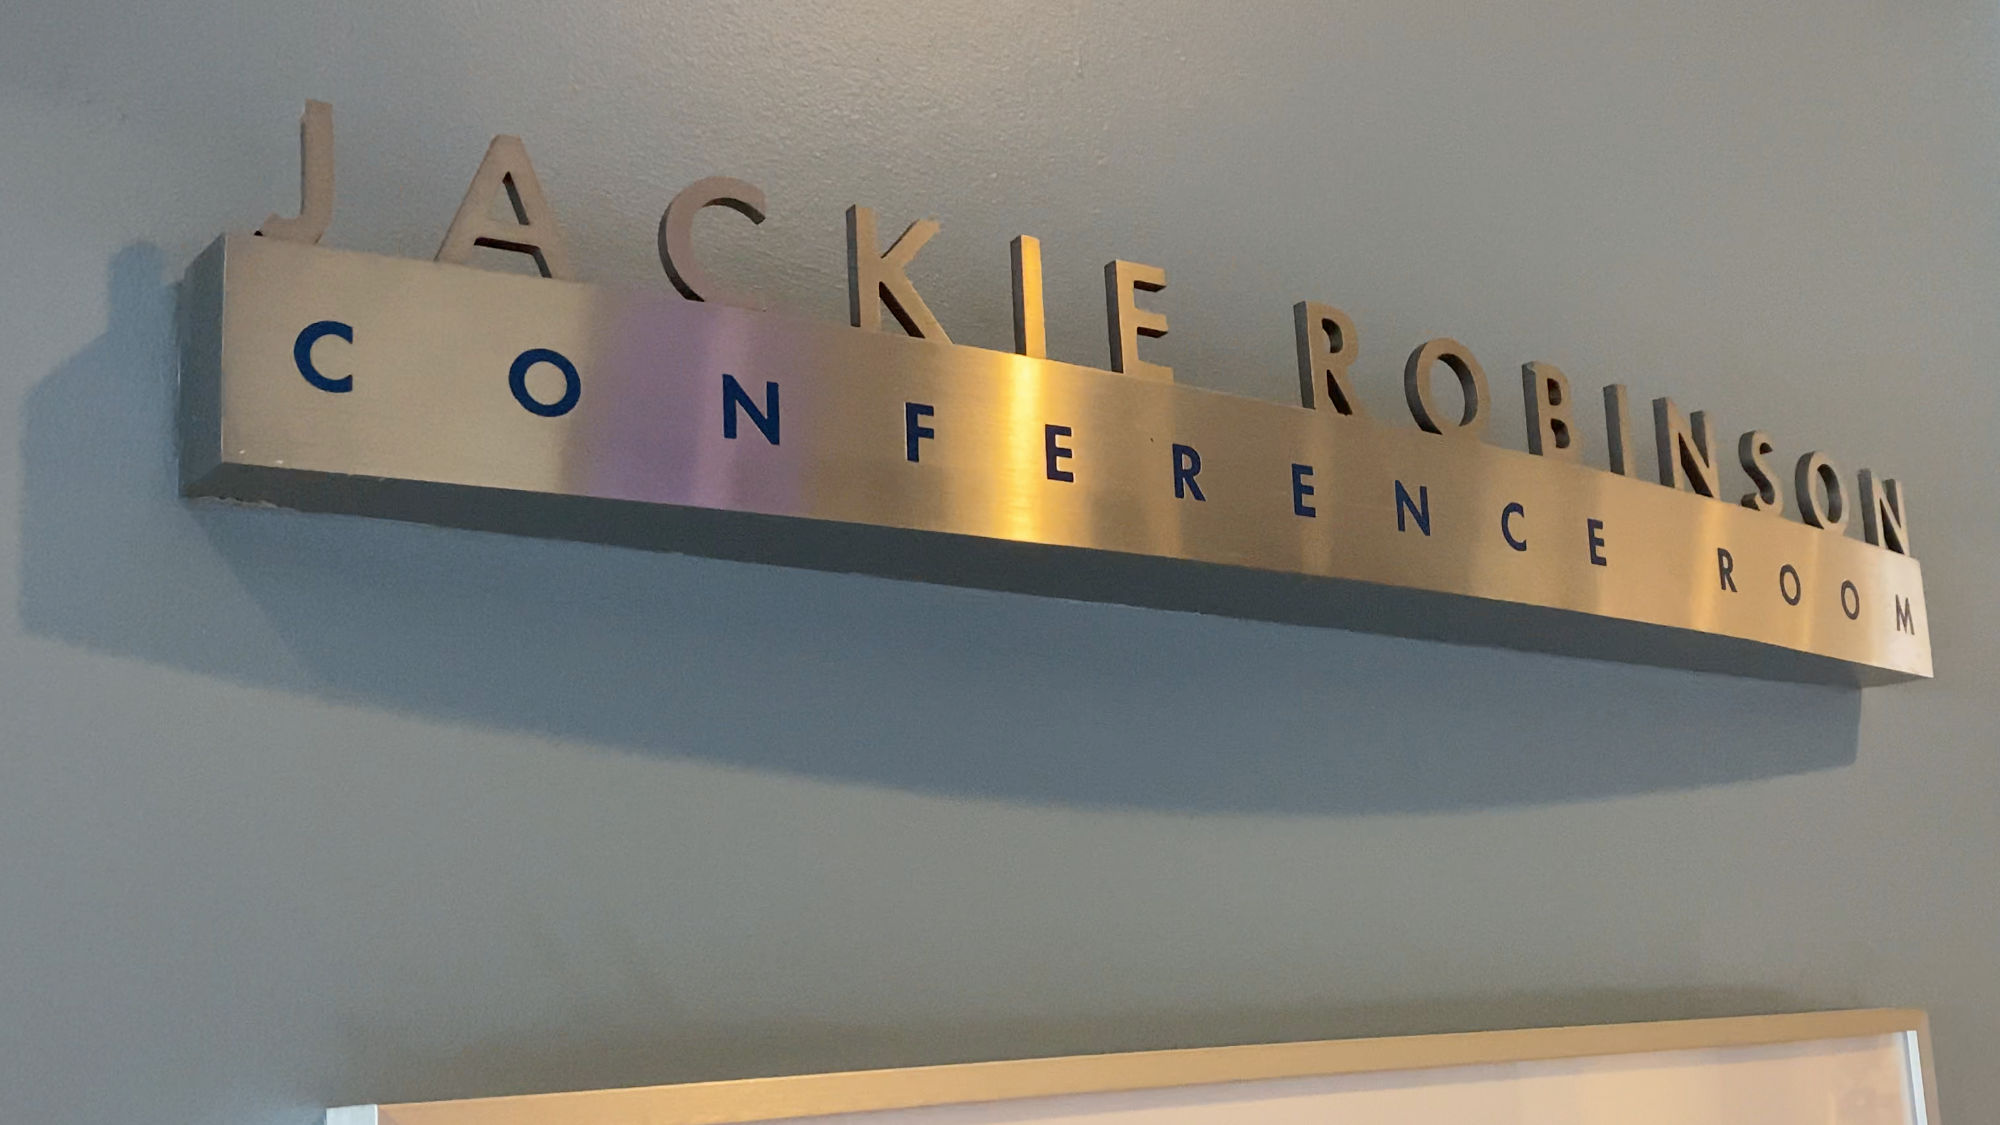 Jackie Robinson Conference Room